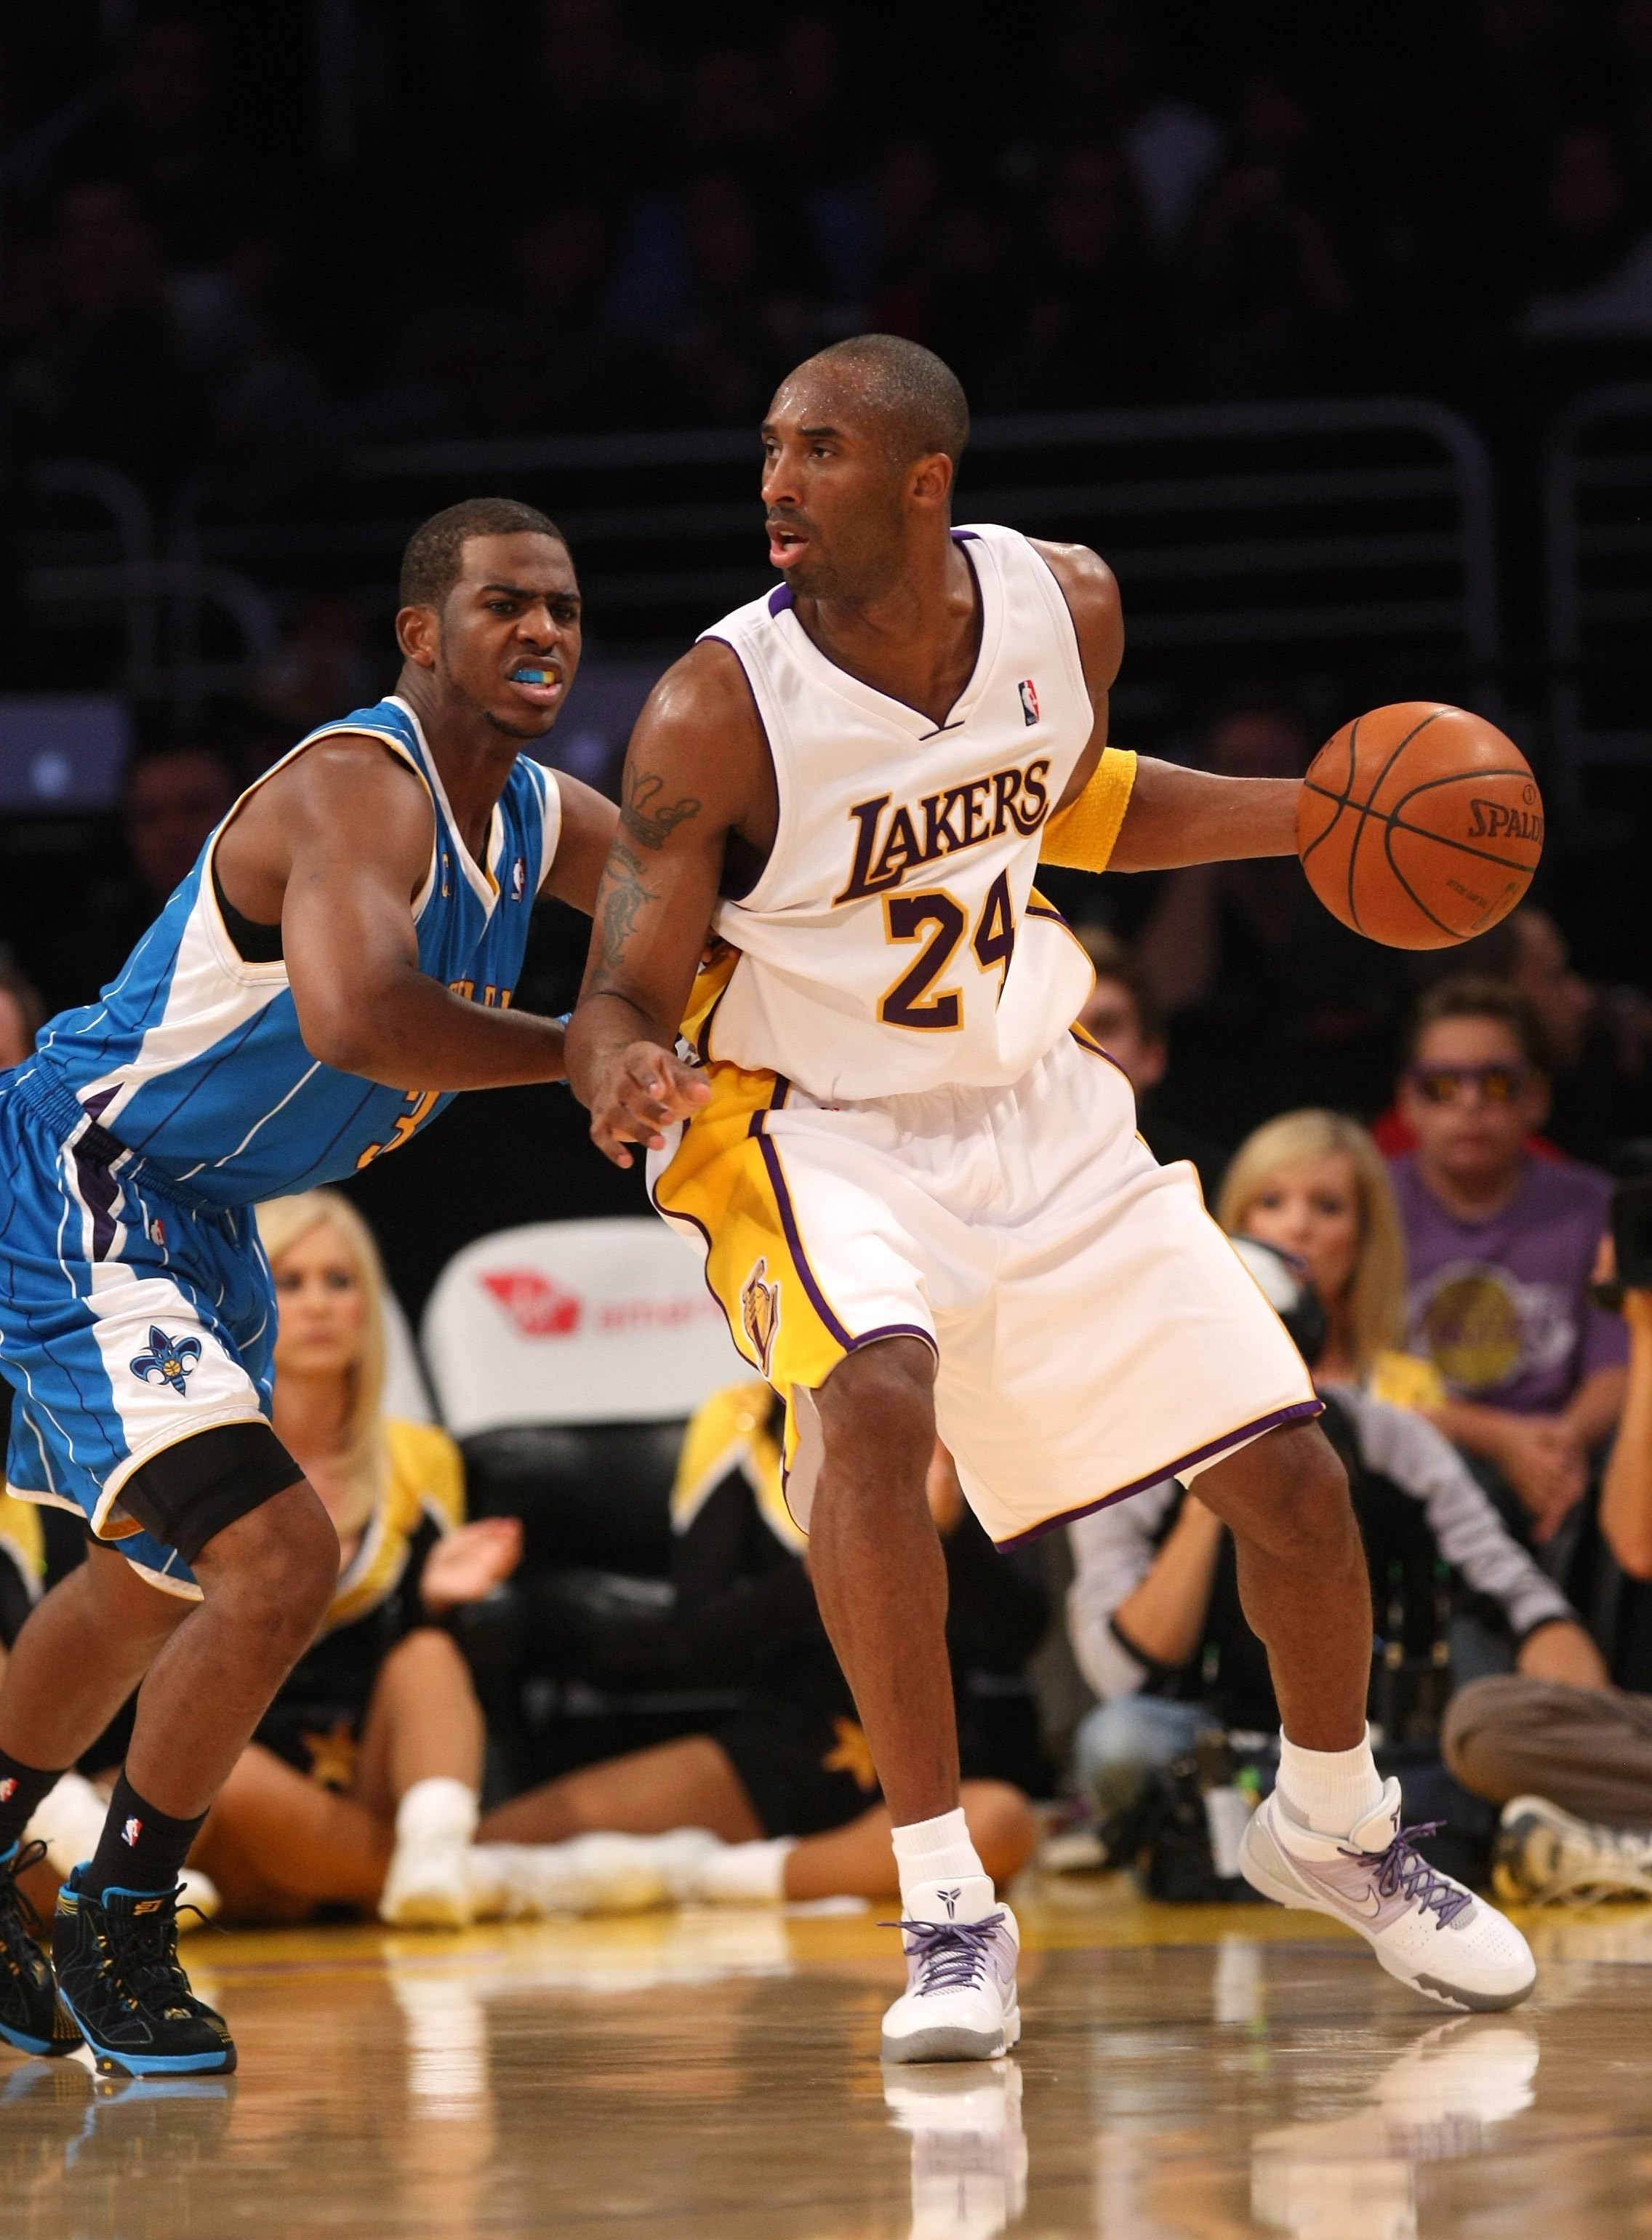 LOS ANGELES, CA - NOVEMBER 08:  Kobe Bryant #24 of the Los Angeles Lakers ccontrols the ball against Chris Paul #3 of the New Orleans Hornets on November 8, 2009 at Staples Center in Los Angeles, California.  NOTE TO USER: User expressly acknowledges and